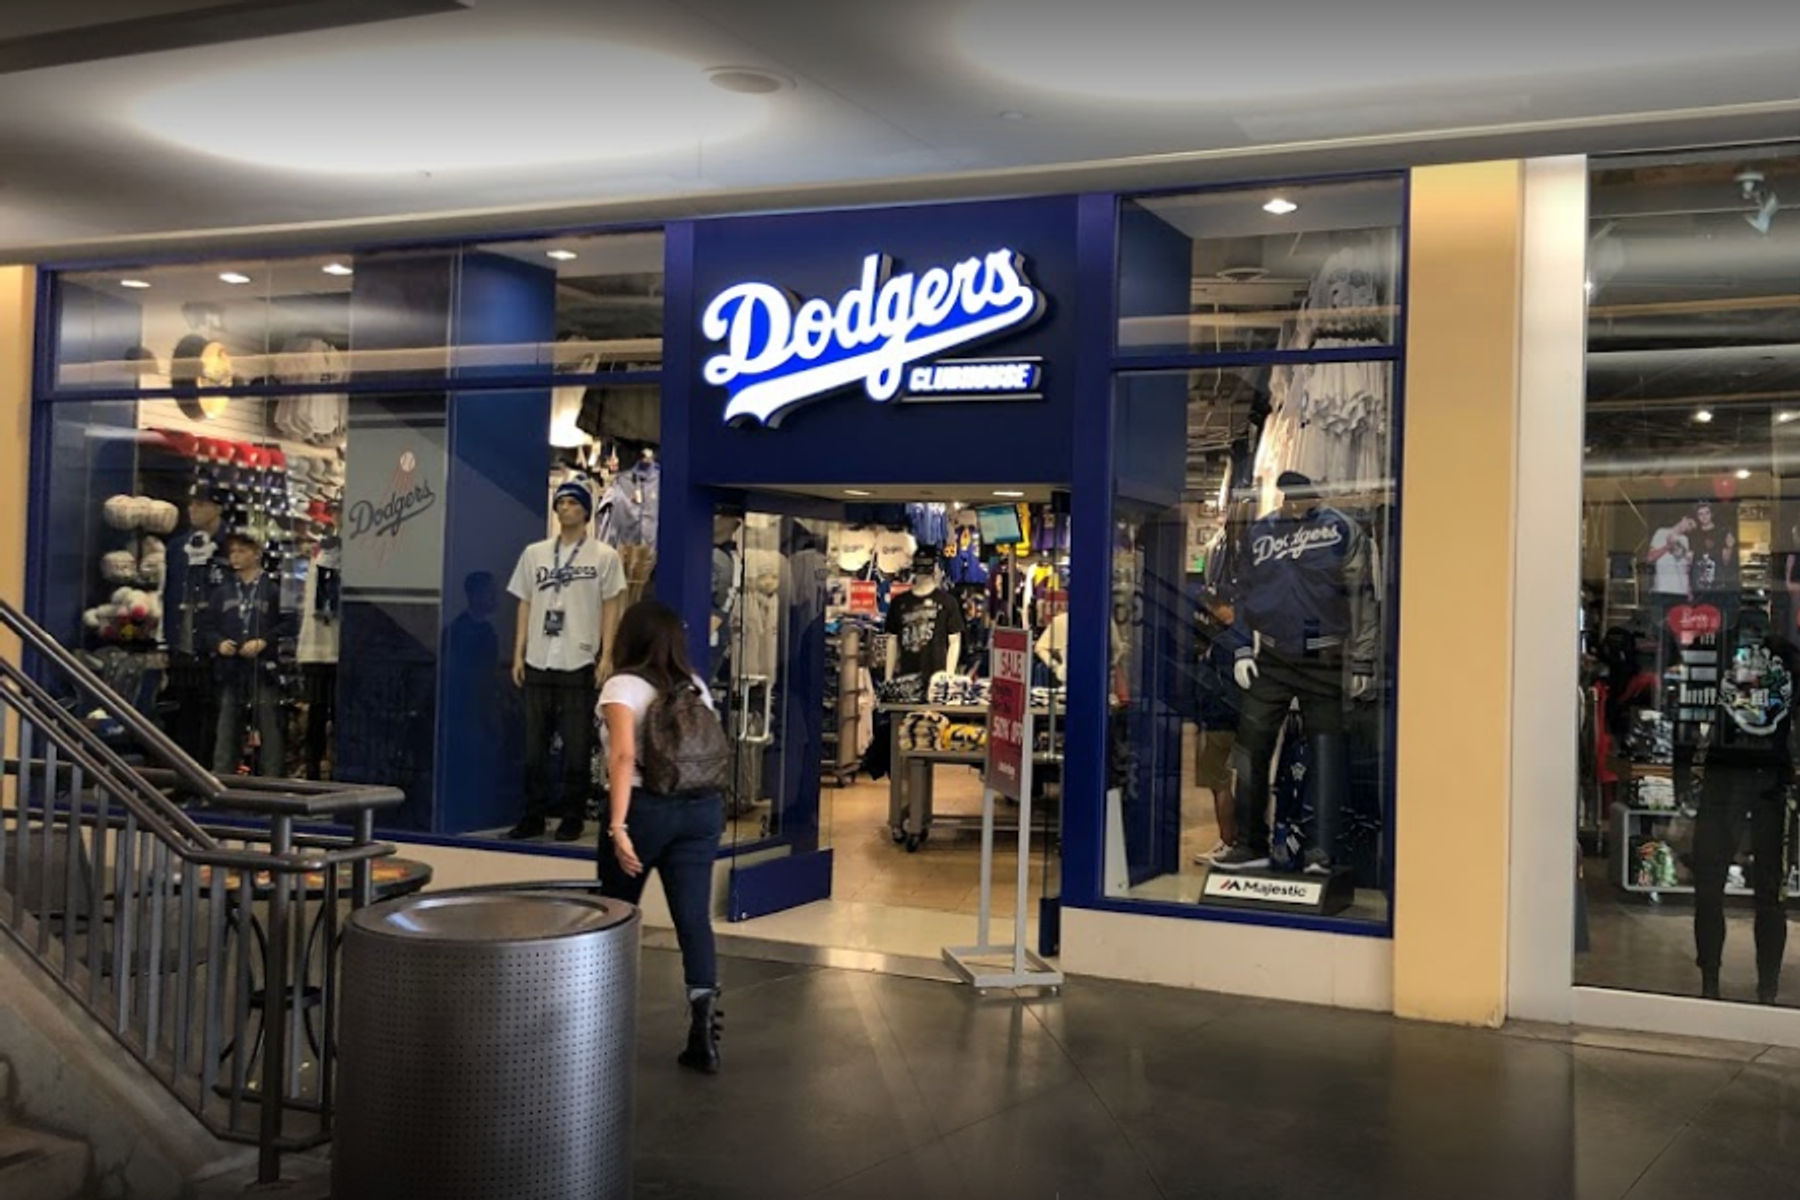 Dodgers Clubhouse  The Hollywood Partnership